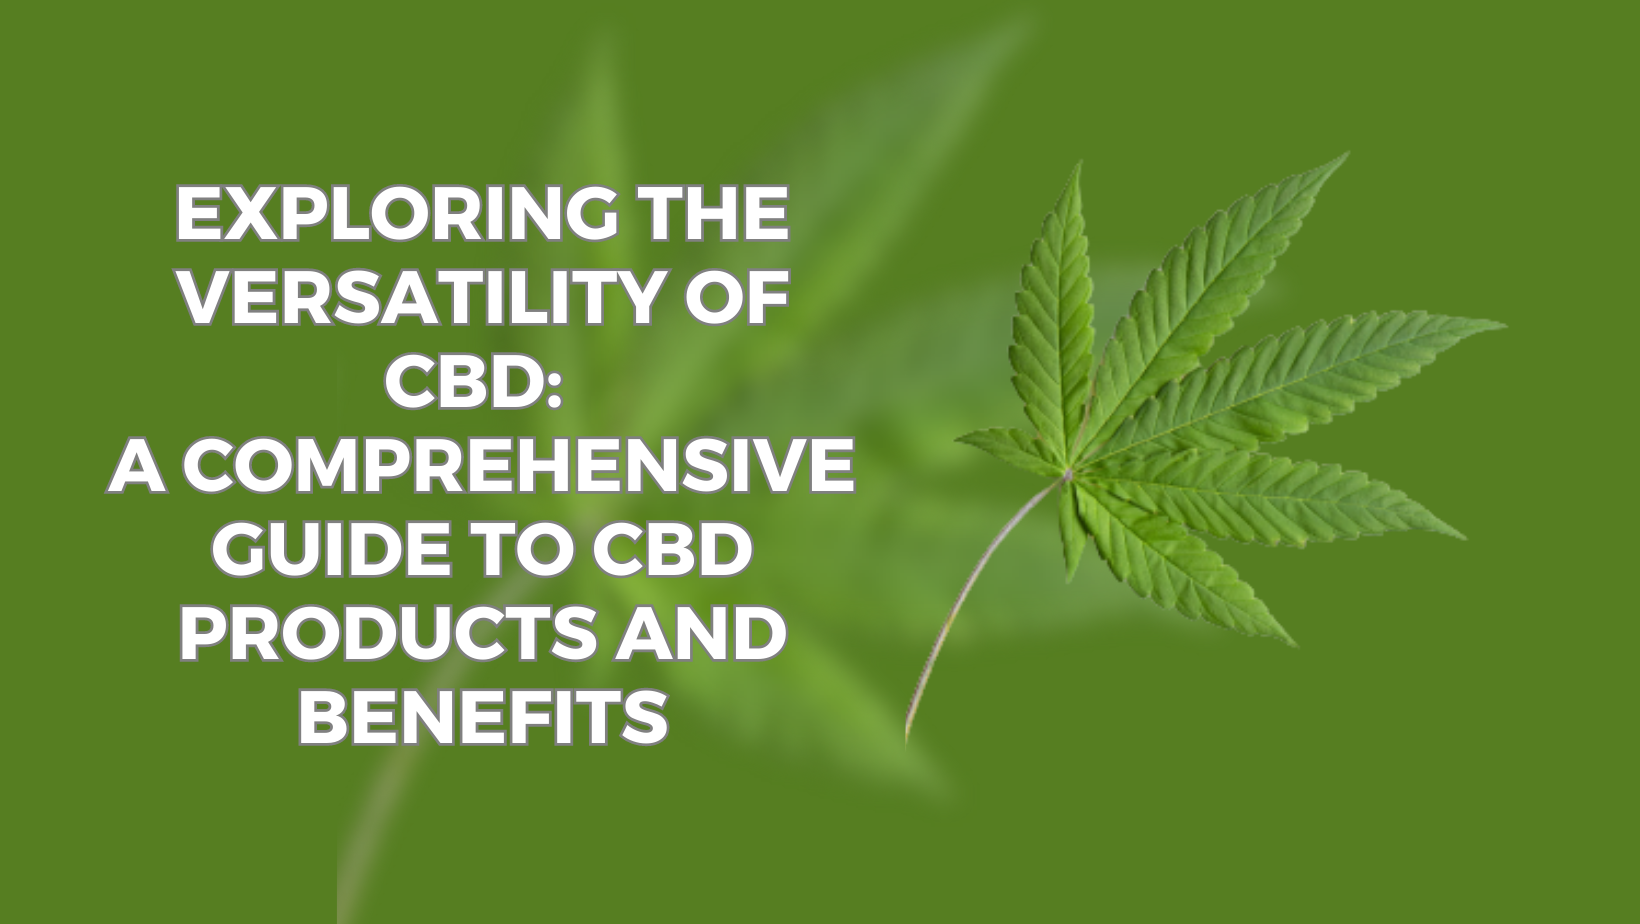 Exploring the Versatility of CBD: A Comprehensive Guide to CBD Products and Benefits